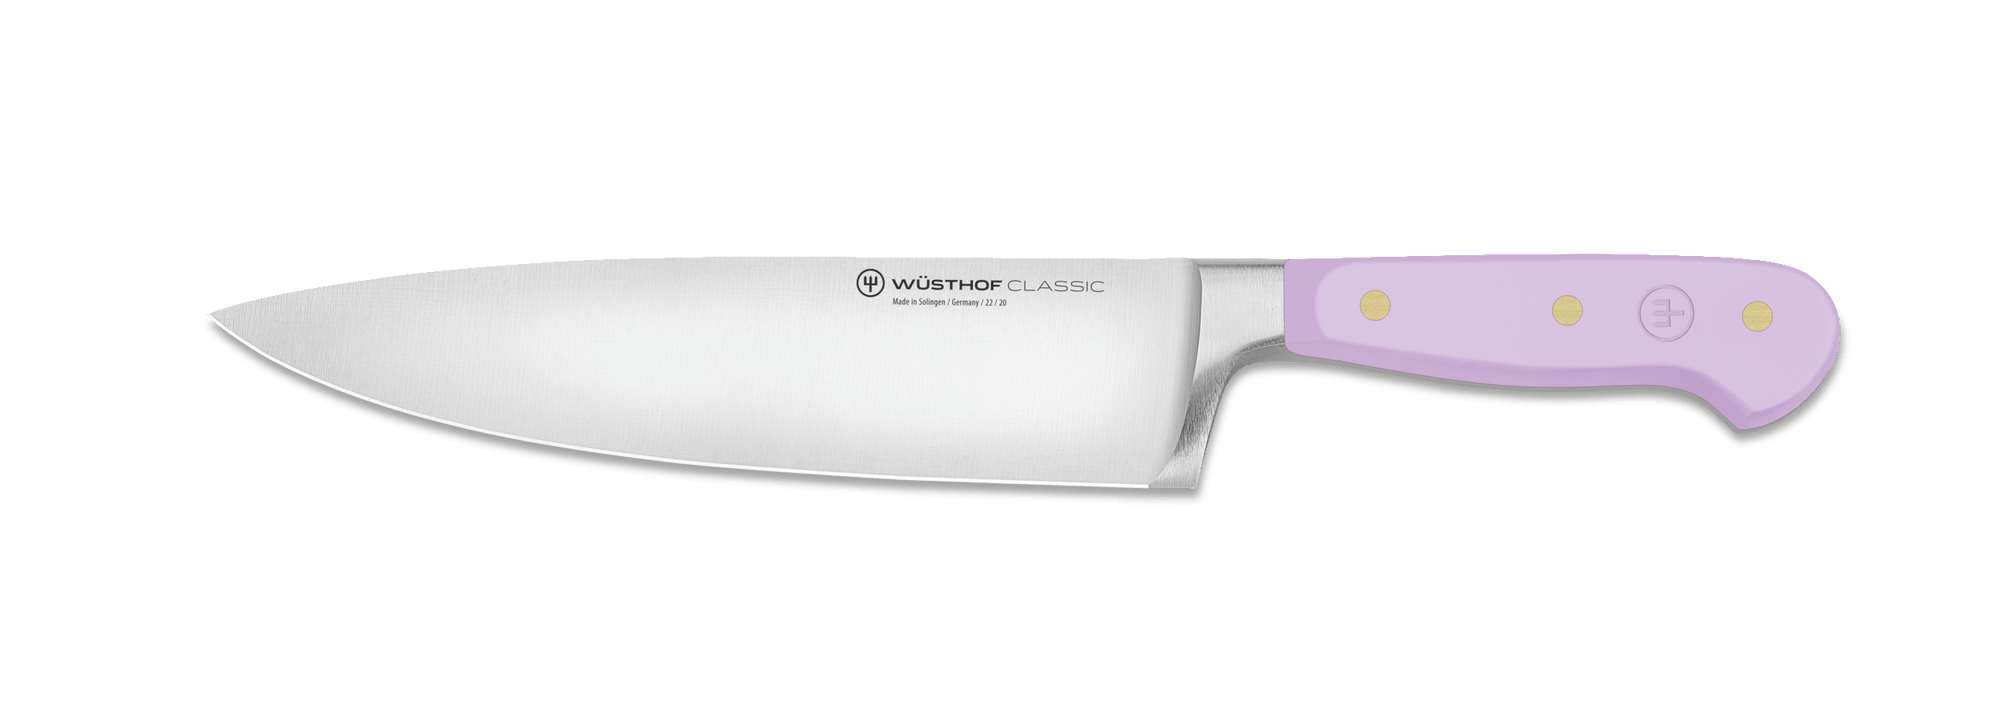 Wusthof Chef's Knives Wusthof Classic 8" Chef's Knife - Lavender